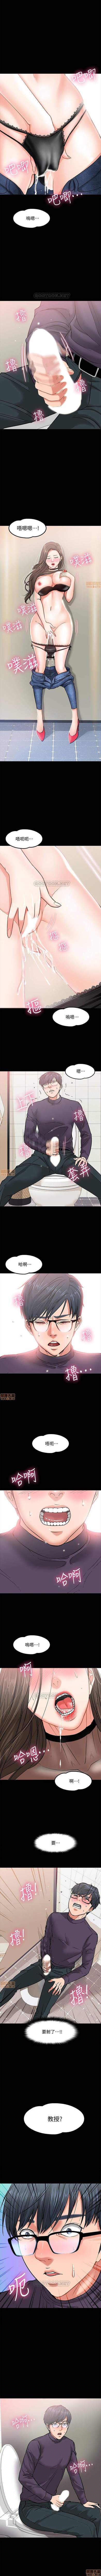 Casa PROFESSOR, ARE YOU JUST GOING TO LOOK AT ME? | DESIRE SWAMP | 教授，你還等什麼? Ch. 3 [Chinese] Manhwa Cbt - Page 7